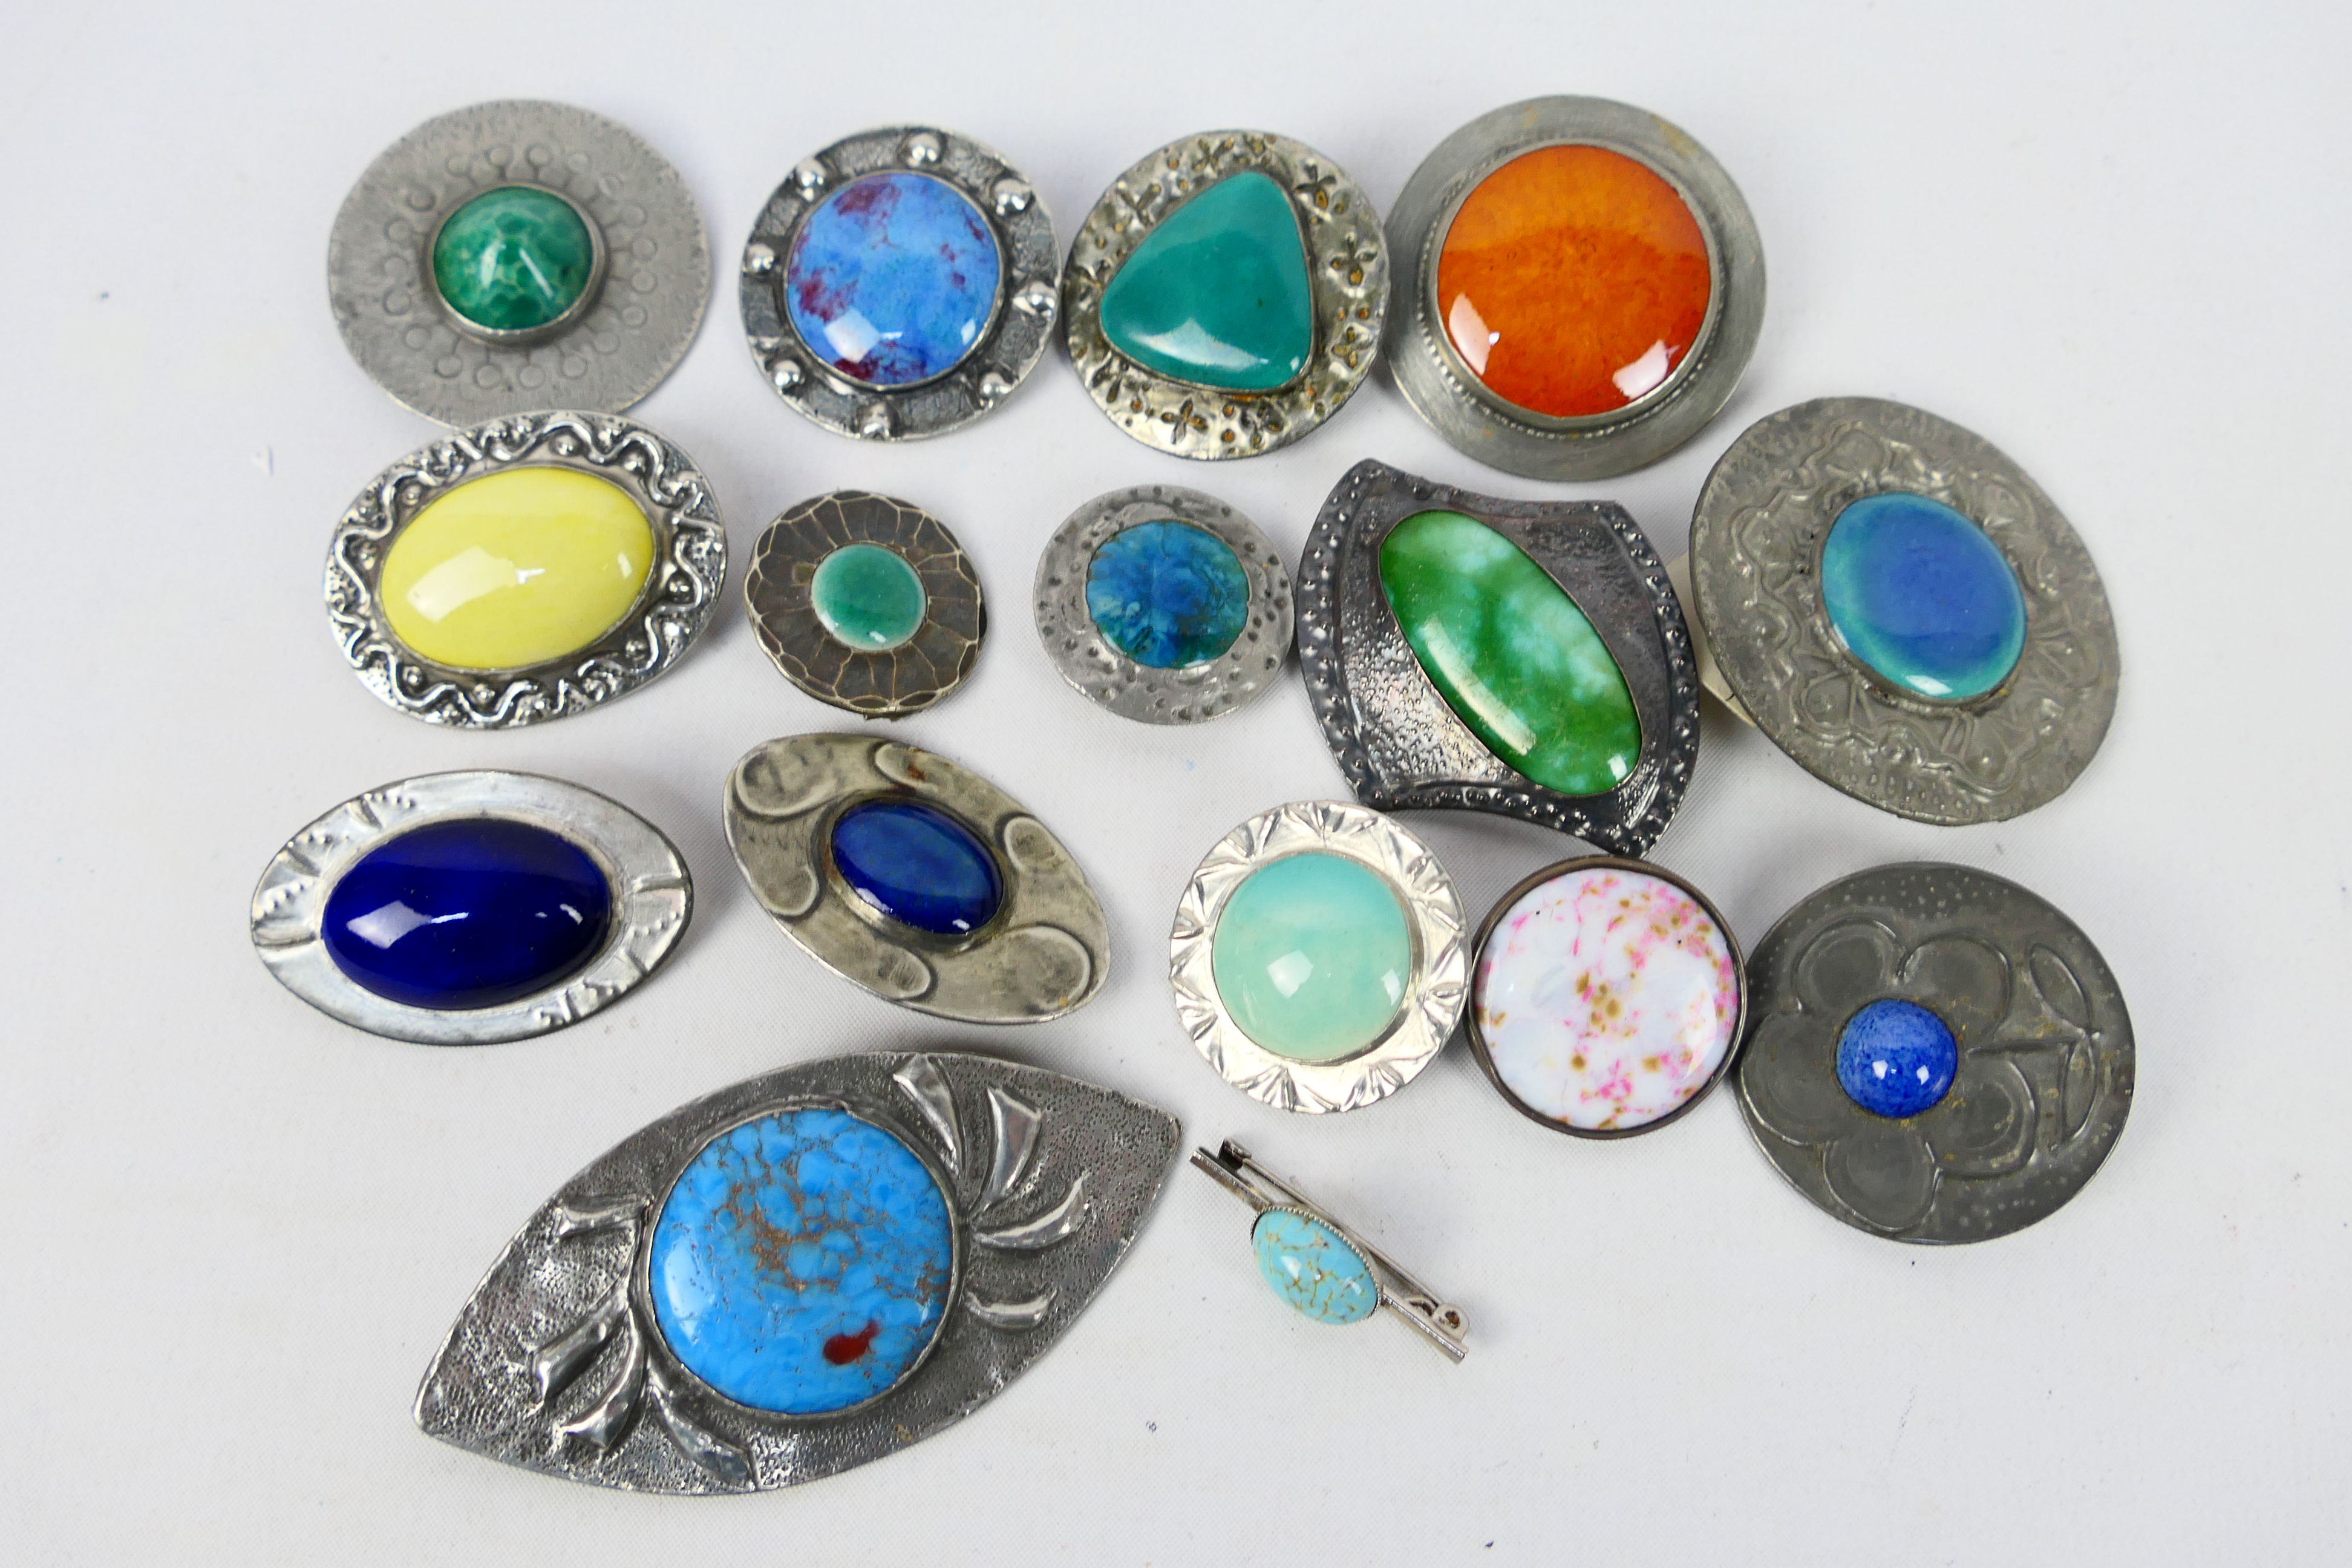 A good collection of Ruskin style brooches.